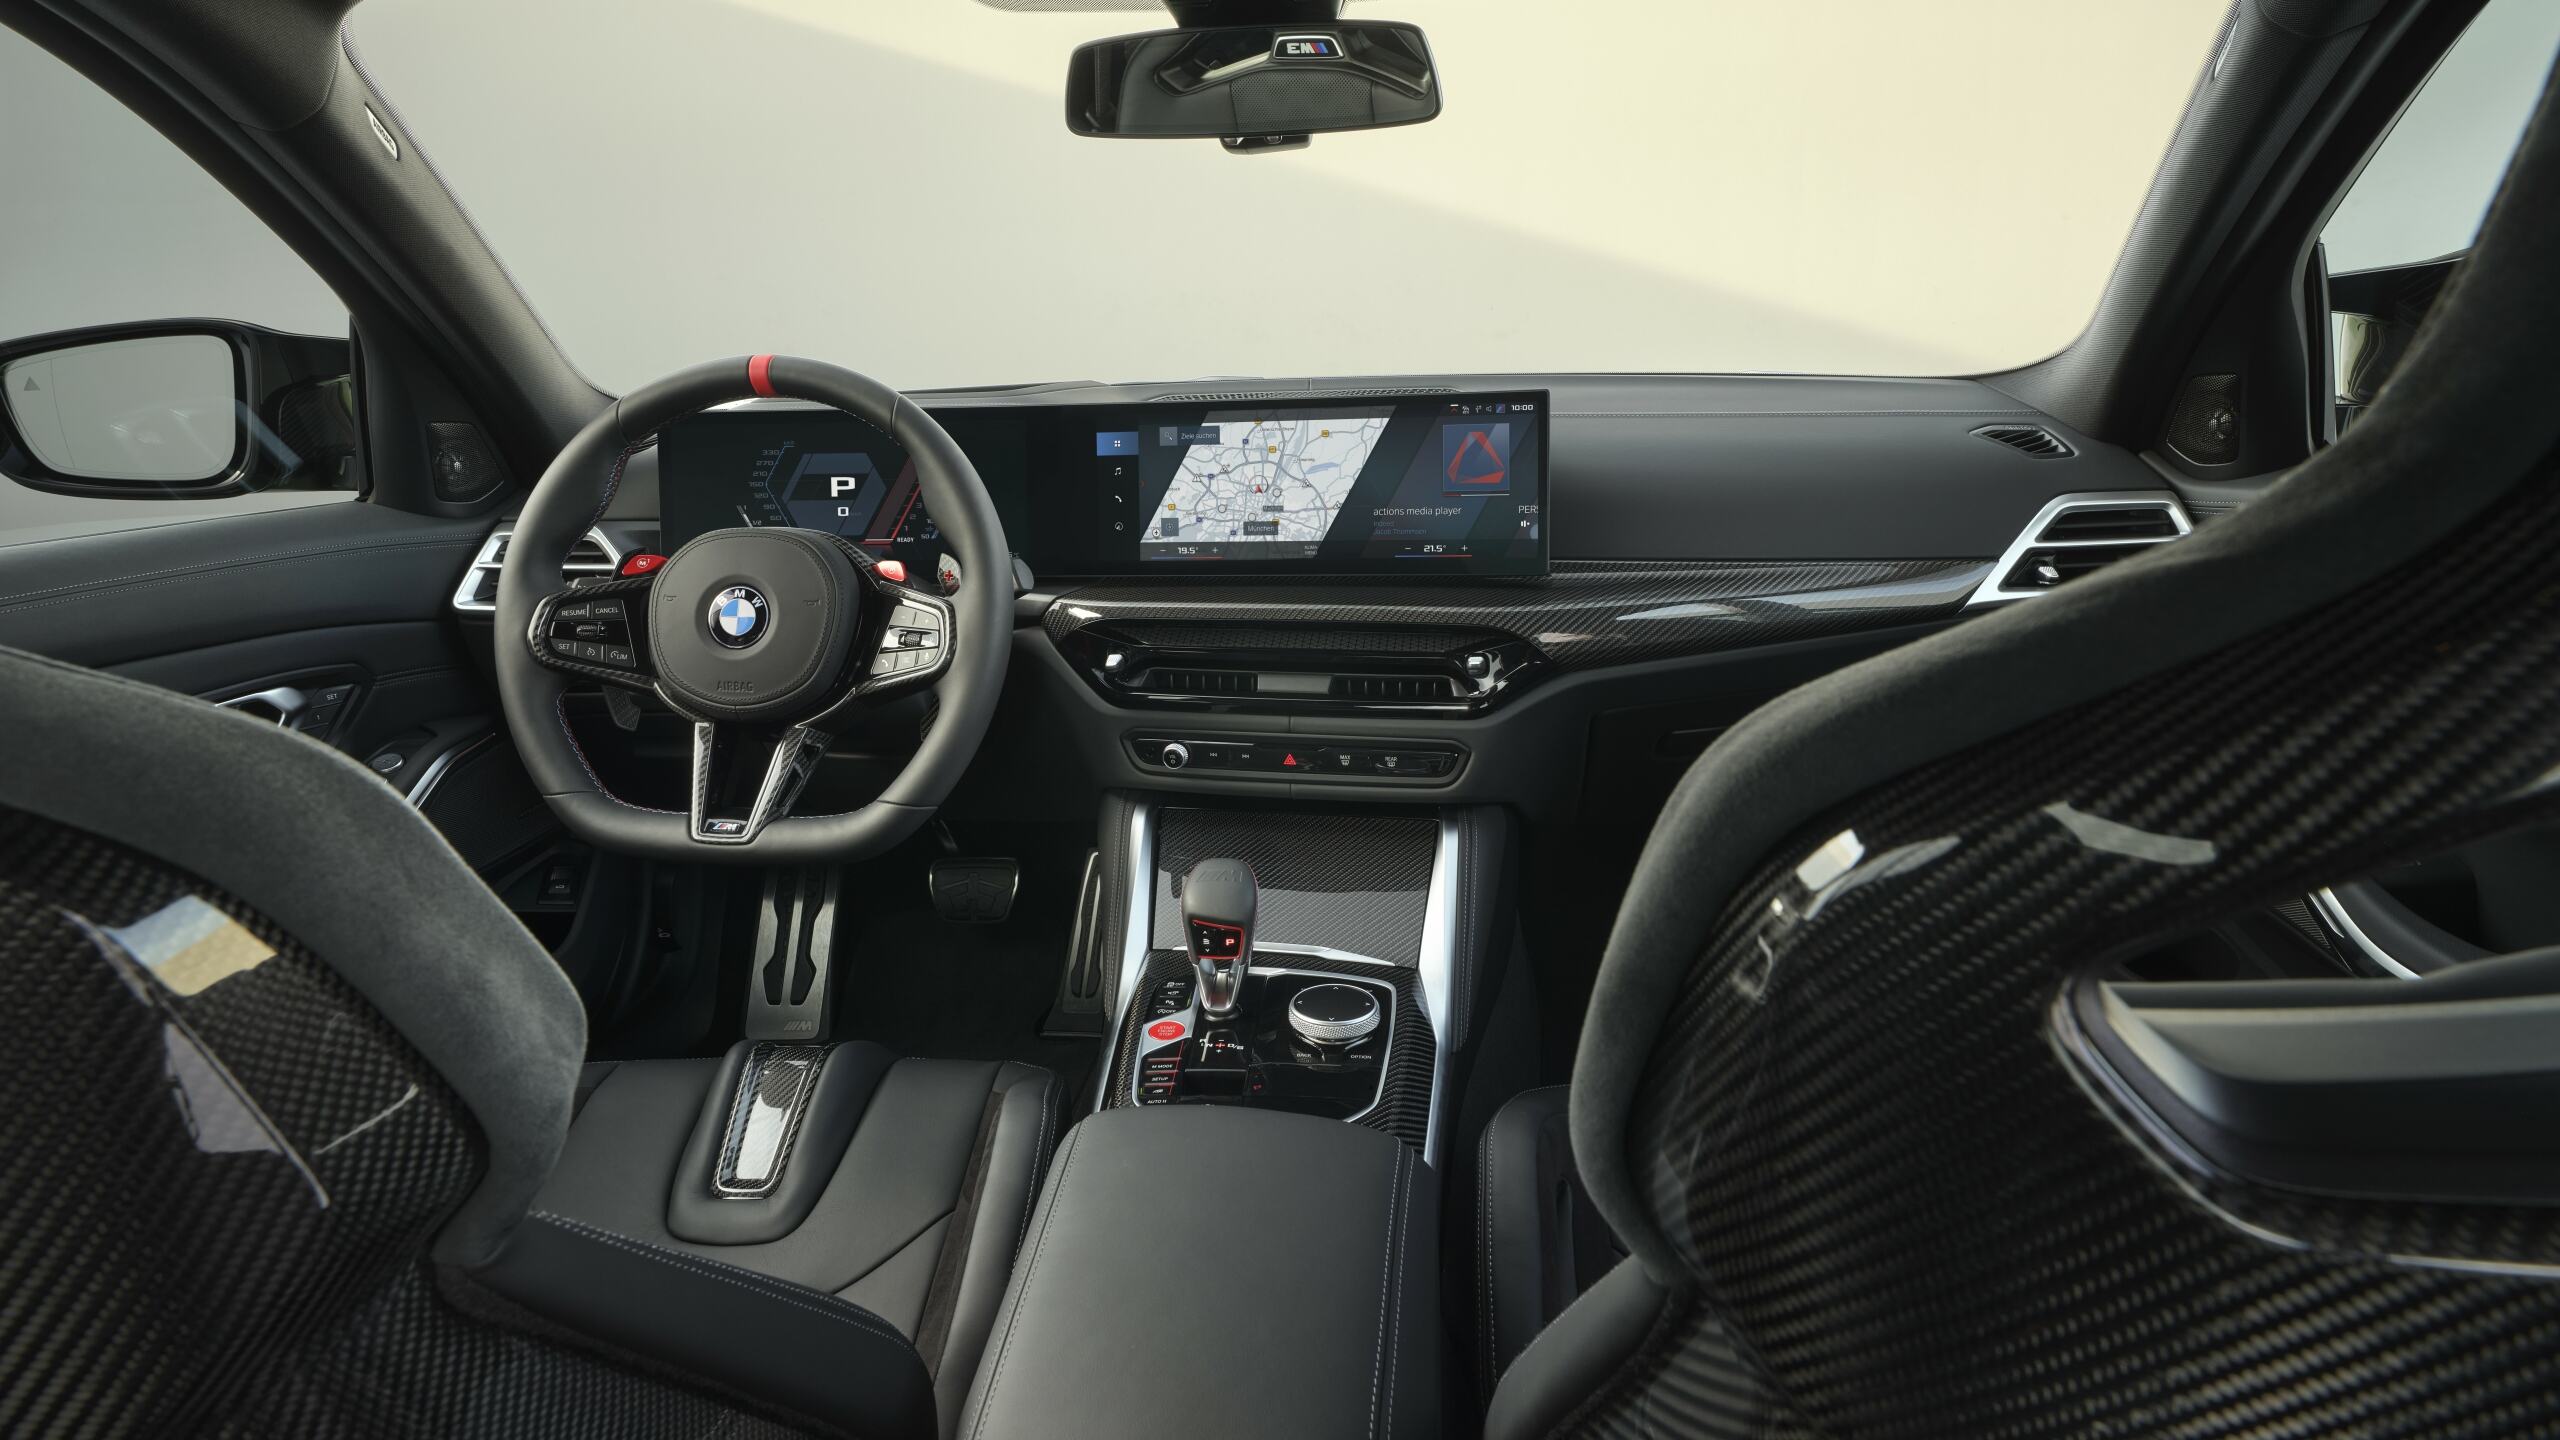 The Interior, Steering Wheel, Dashboard, And Center Console Of The New BMW M3